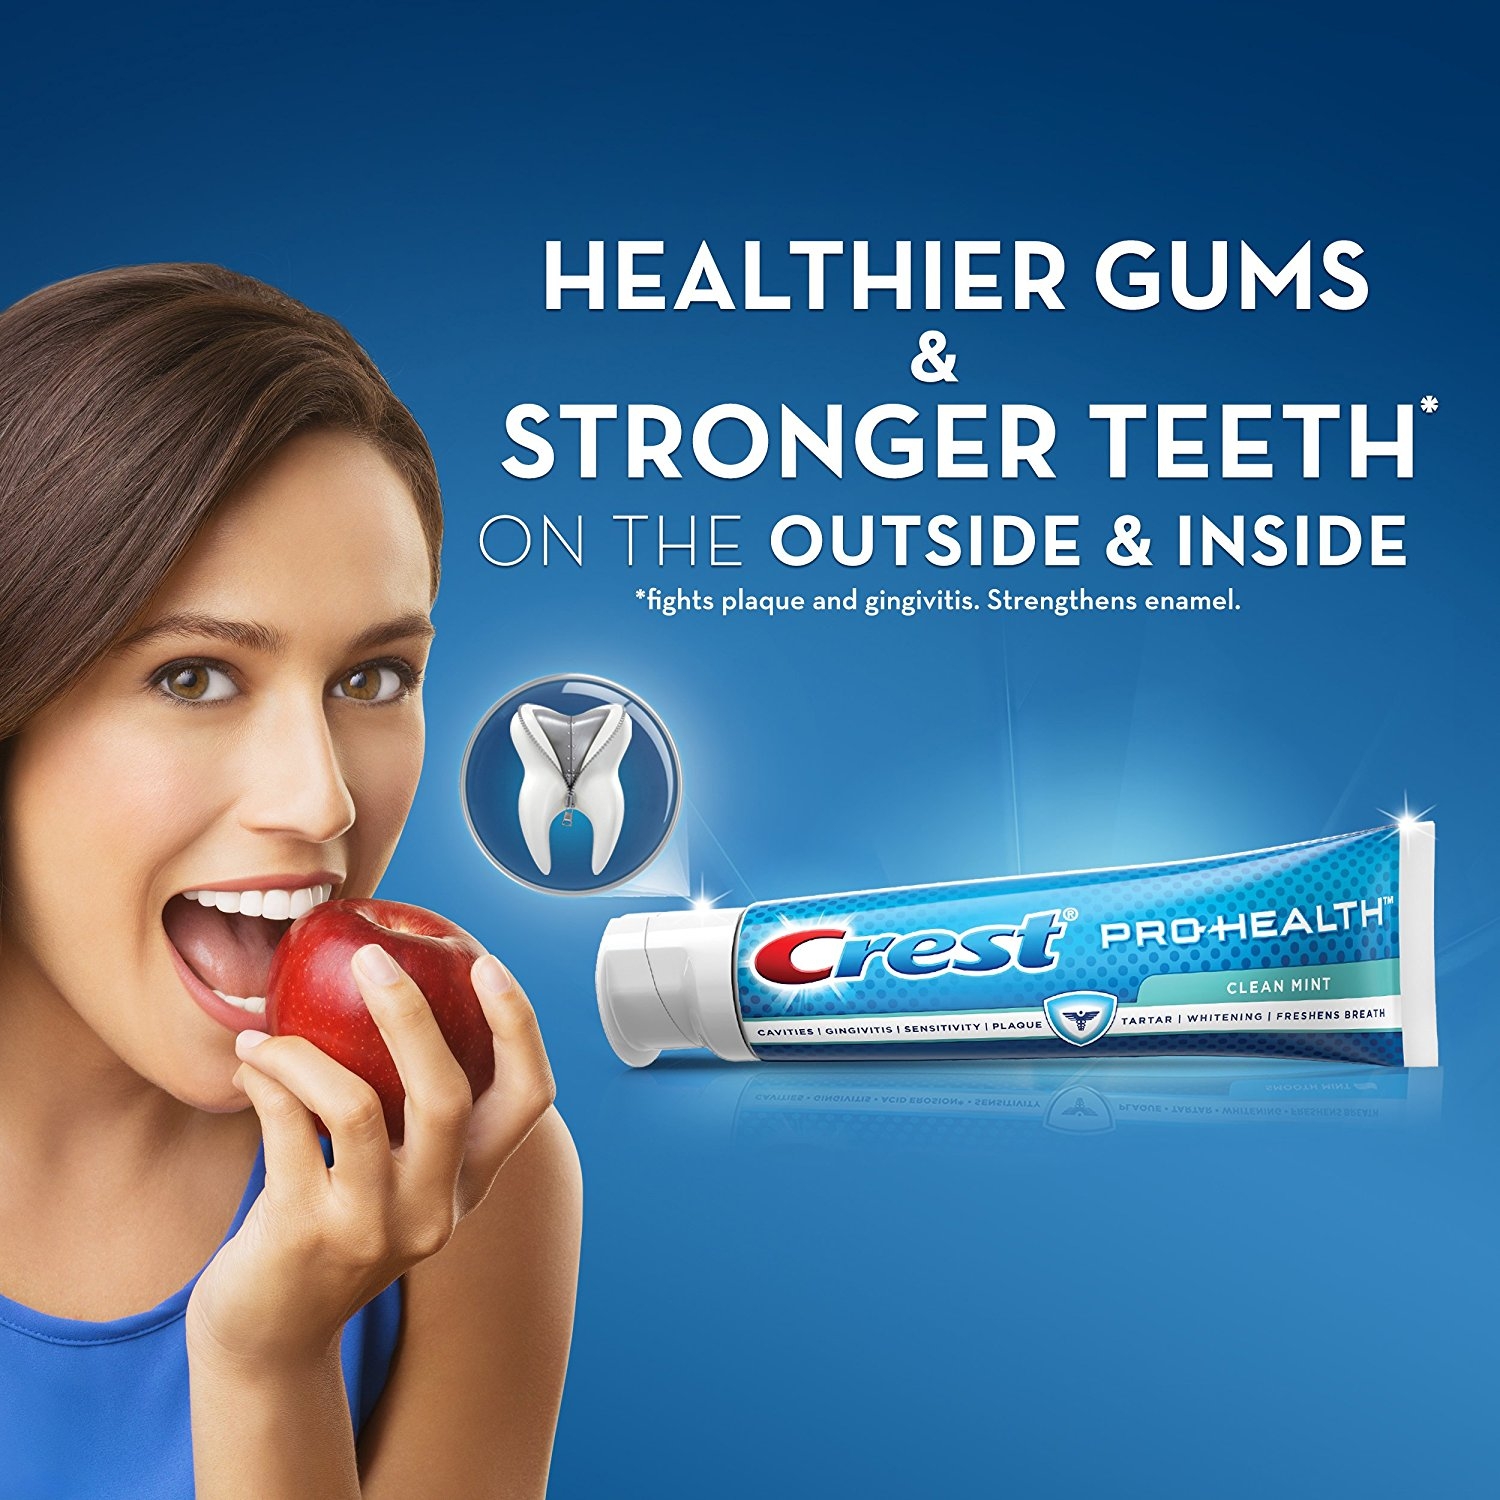 Crest Pro-Health Clean Mint Toothpaste, 4.6oz, Twin Pack - image 9 of 9